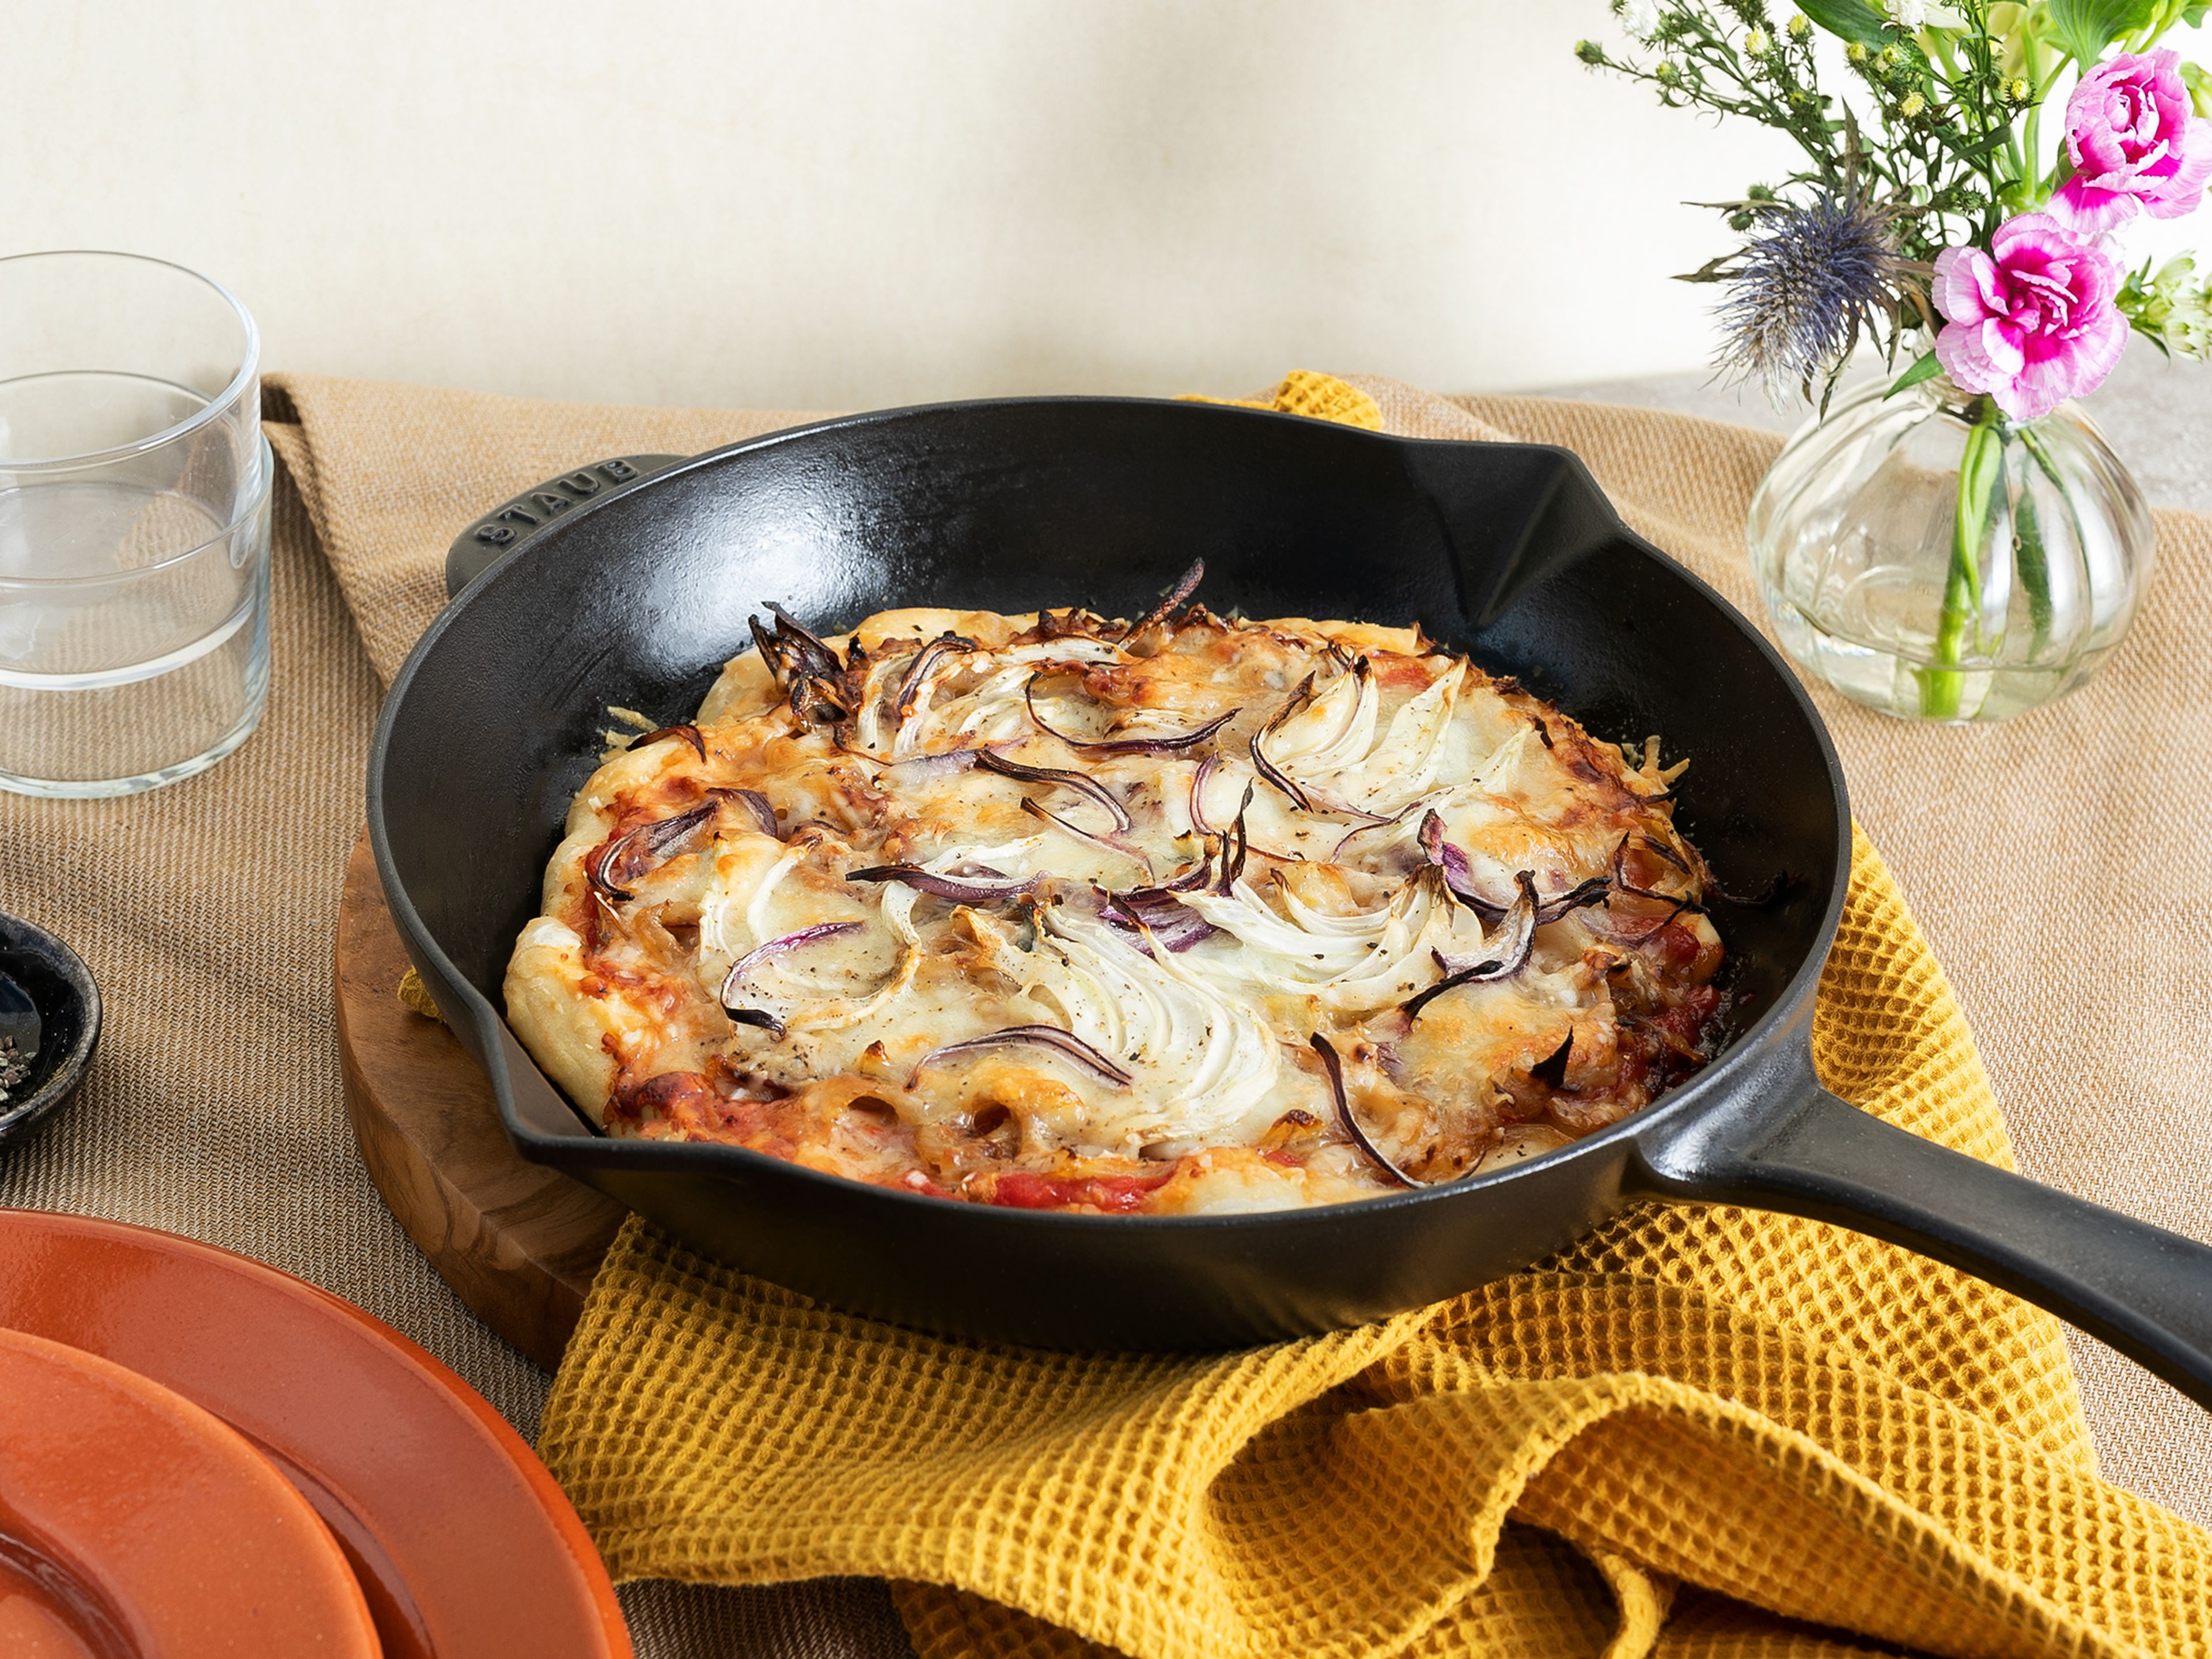 Skillet pizza with onions and fennel